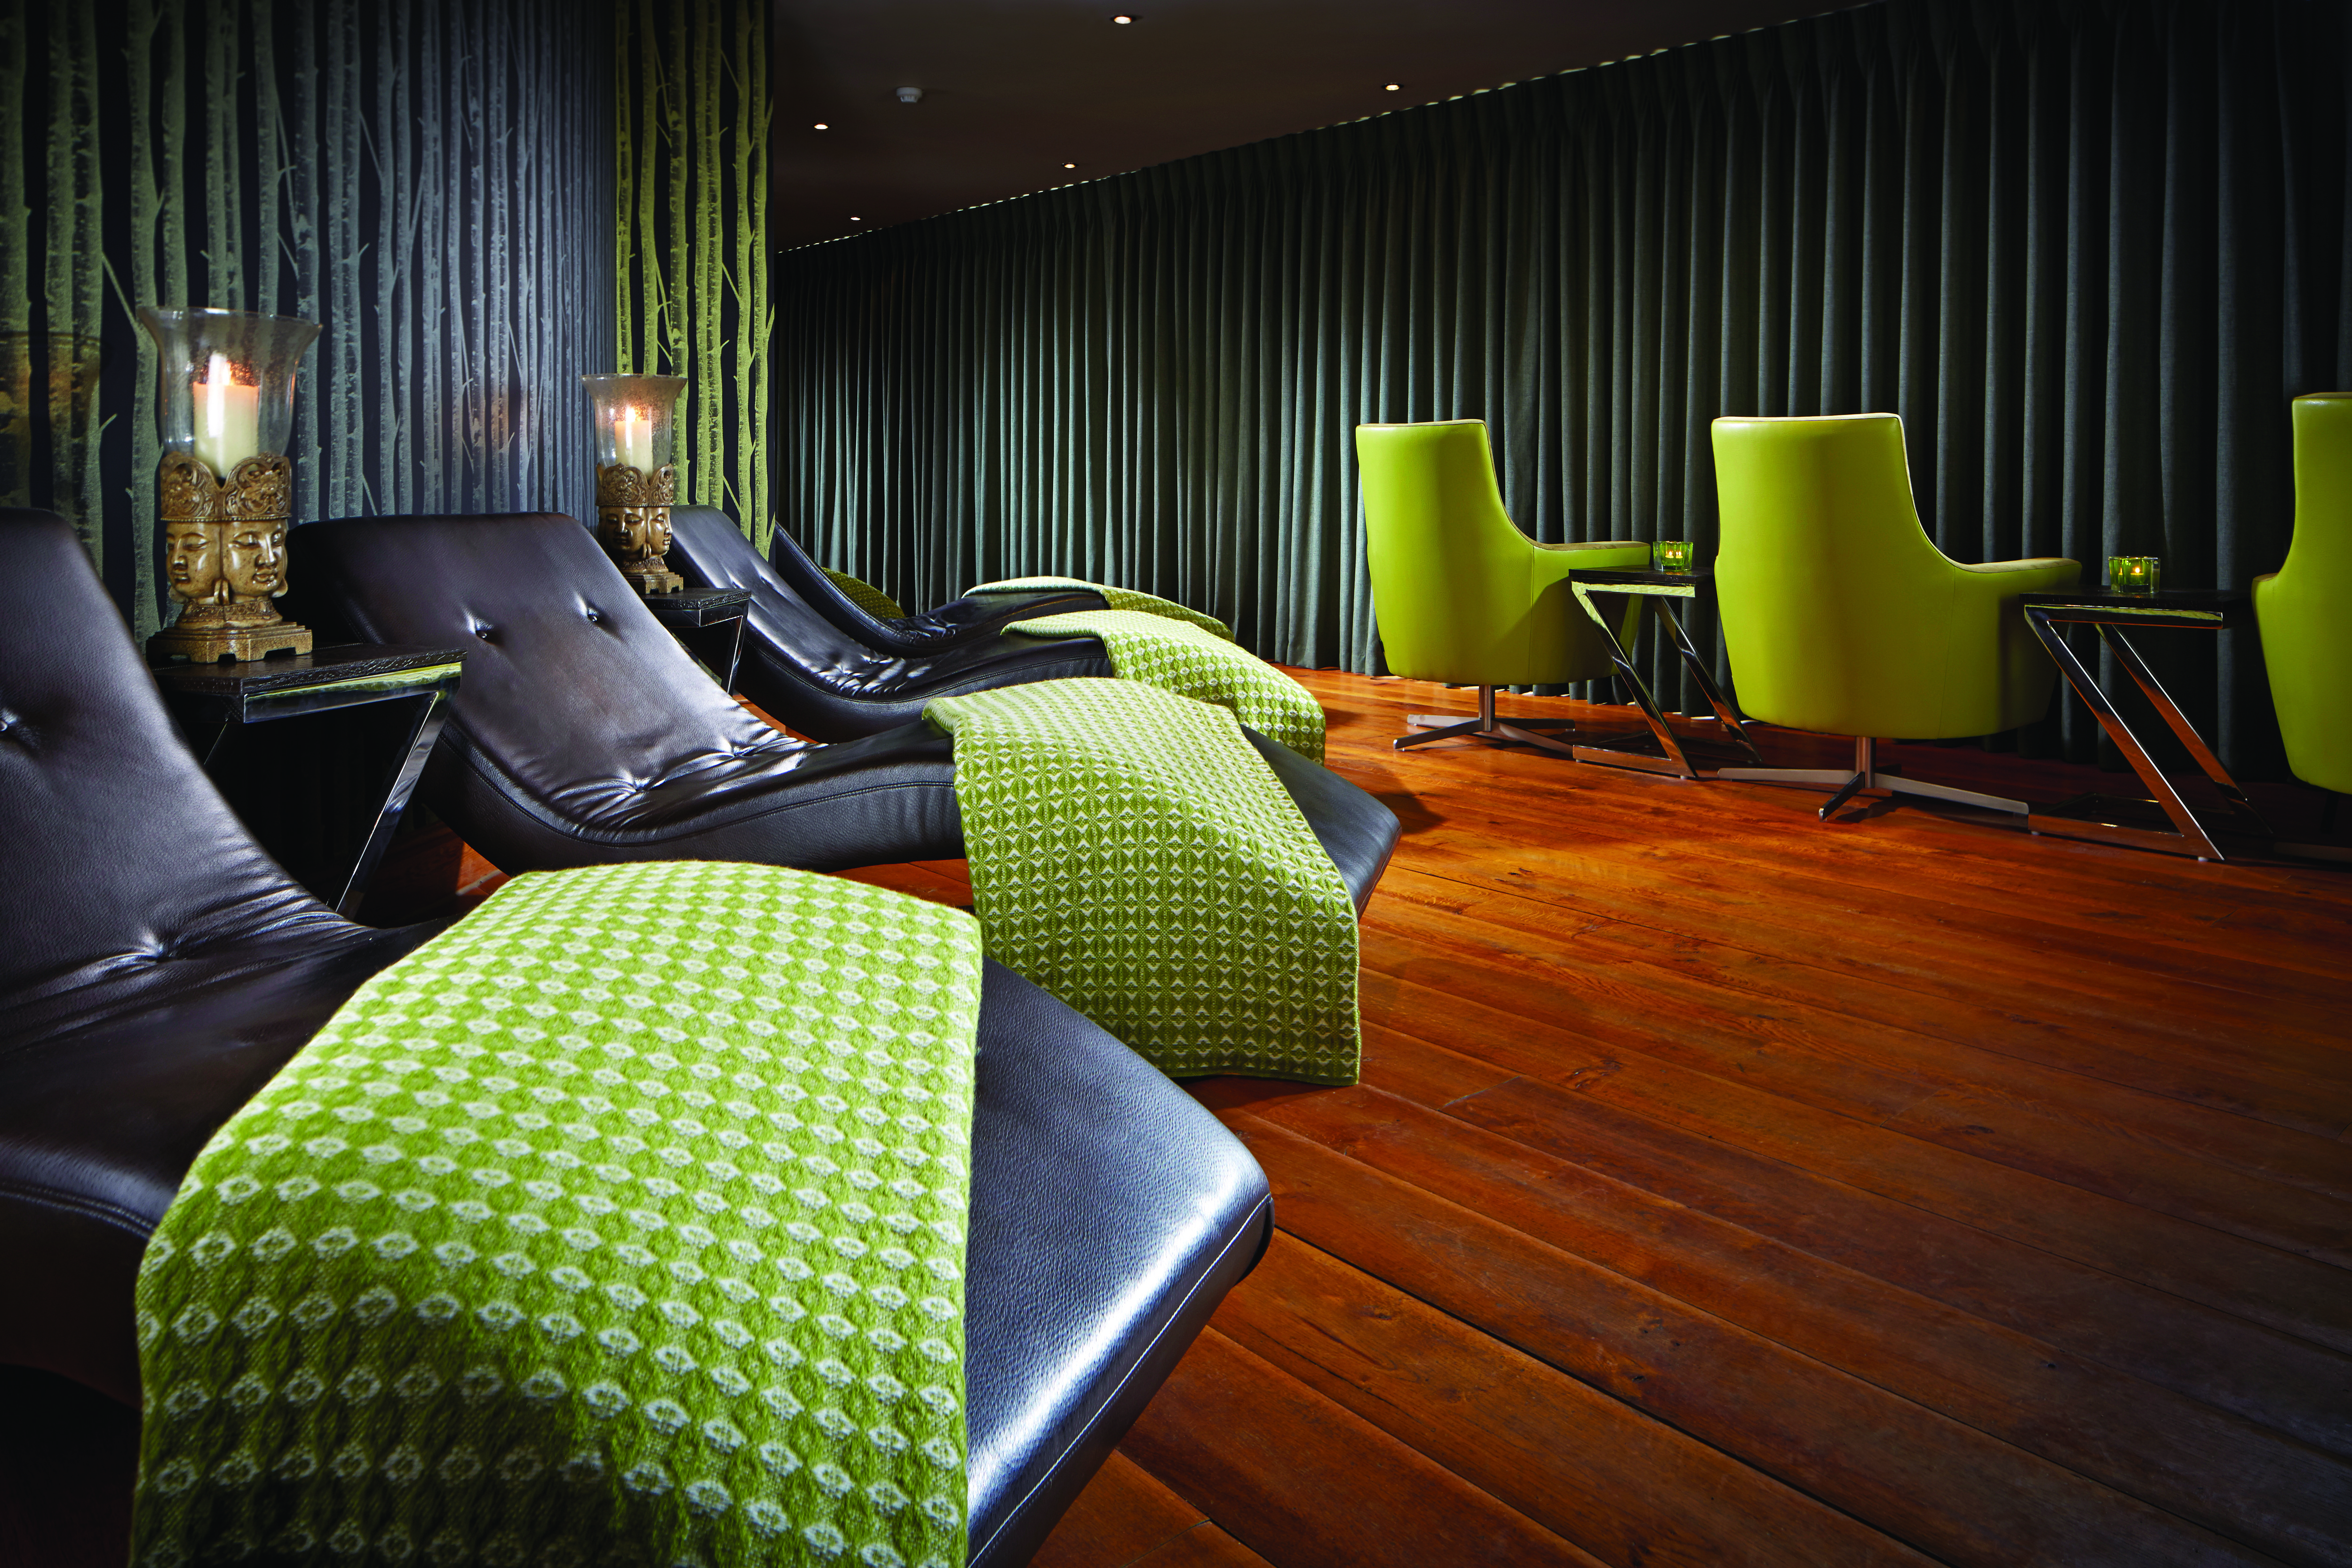 2 Night Escape With Treatments, Alexander House Hotel And Utopia Spa